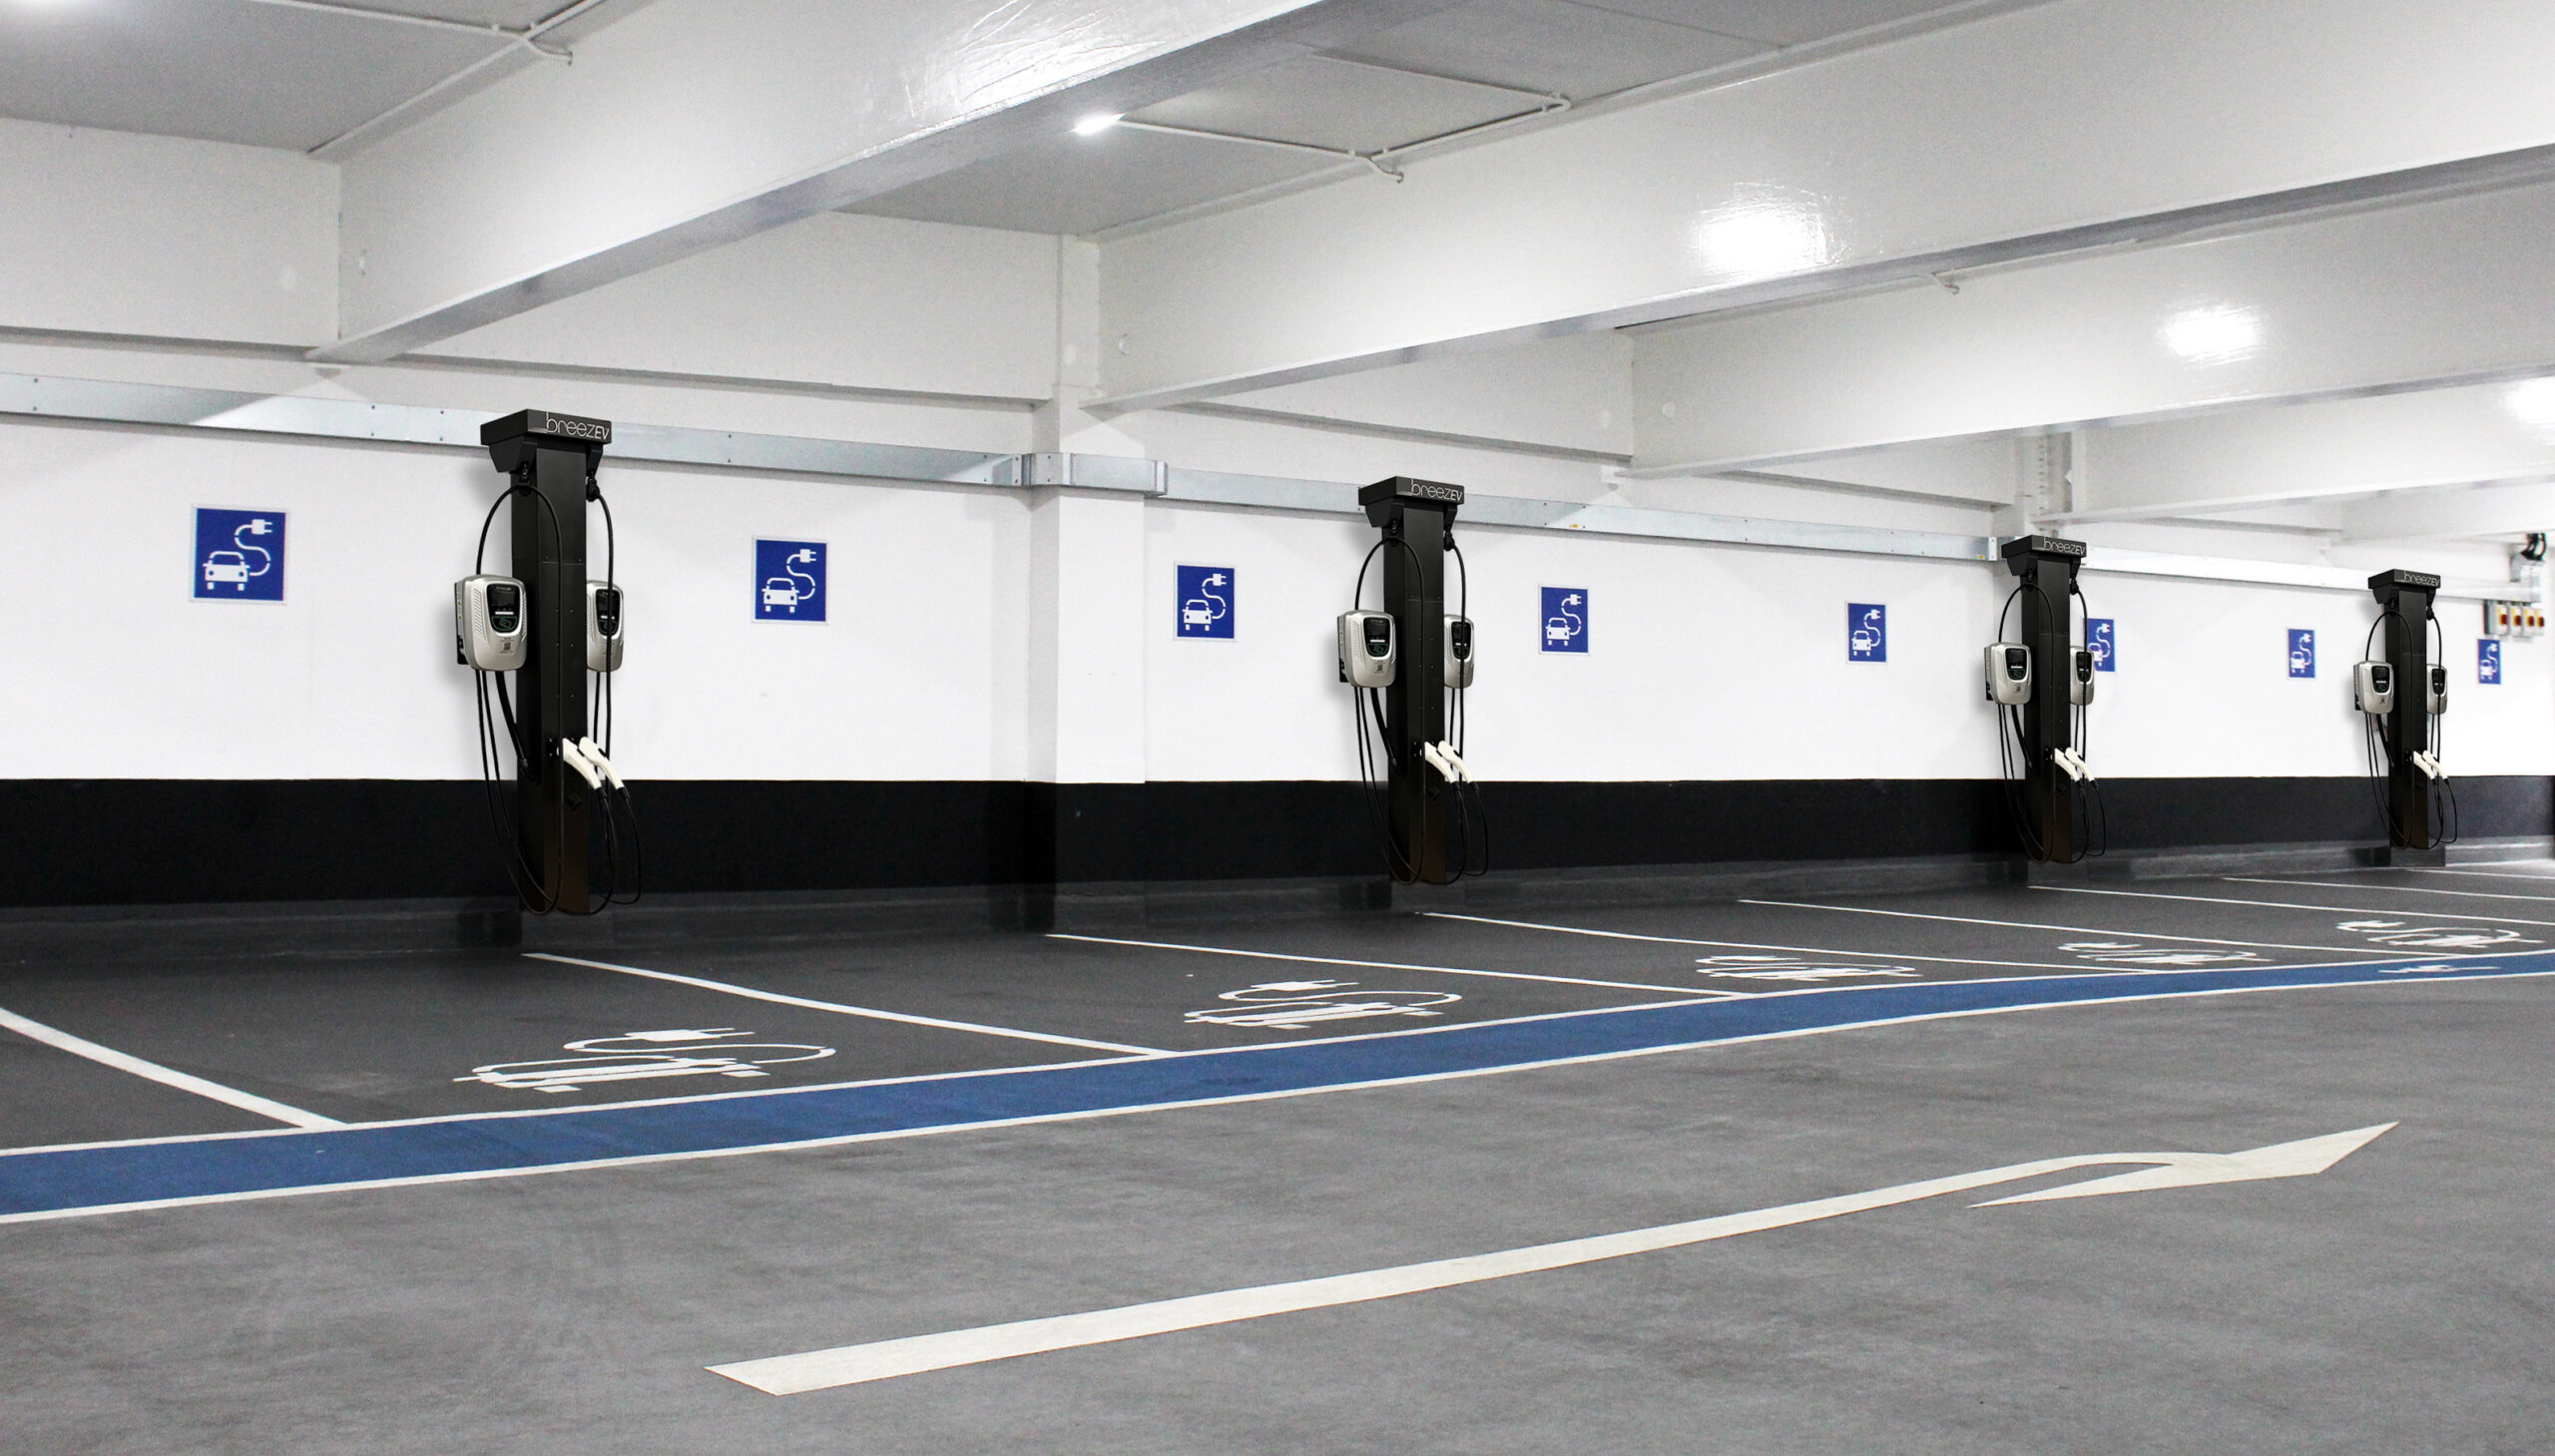 Row of empty electric car charging stations in indoor parking ga